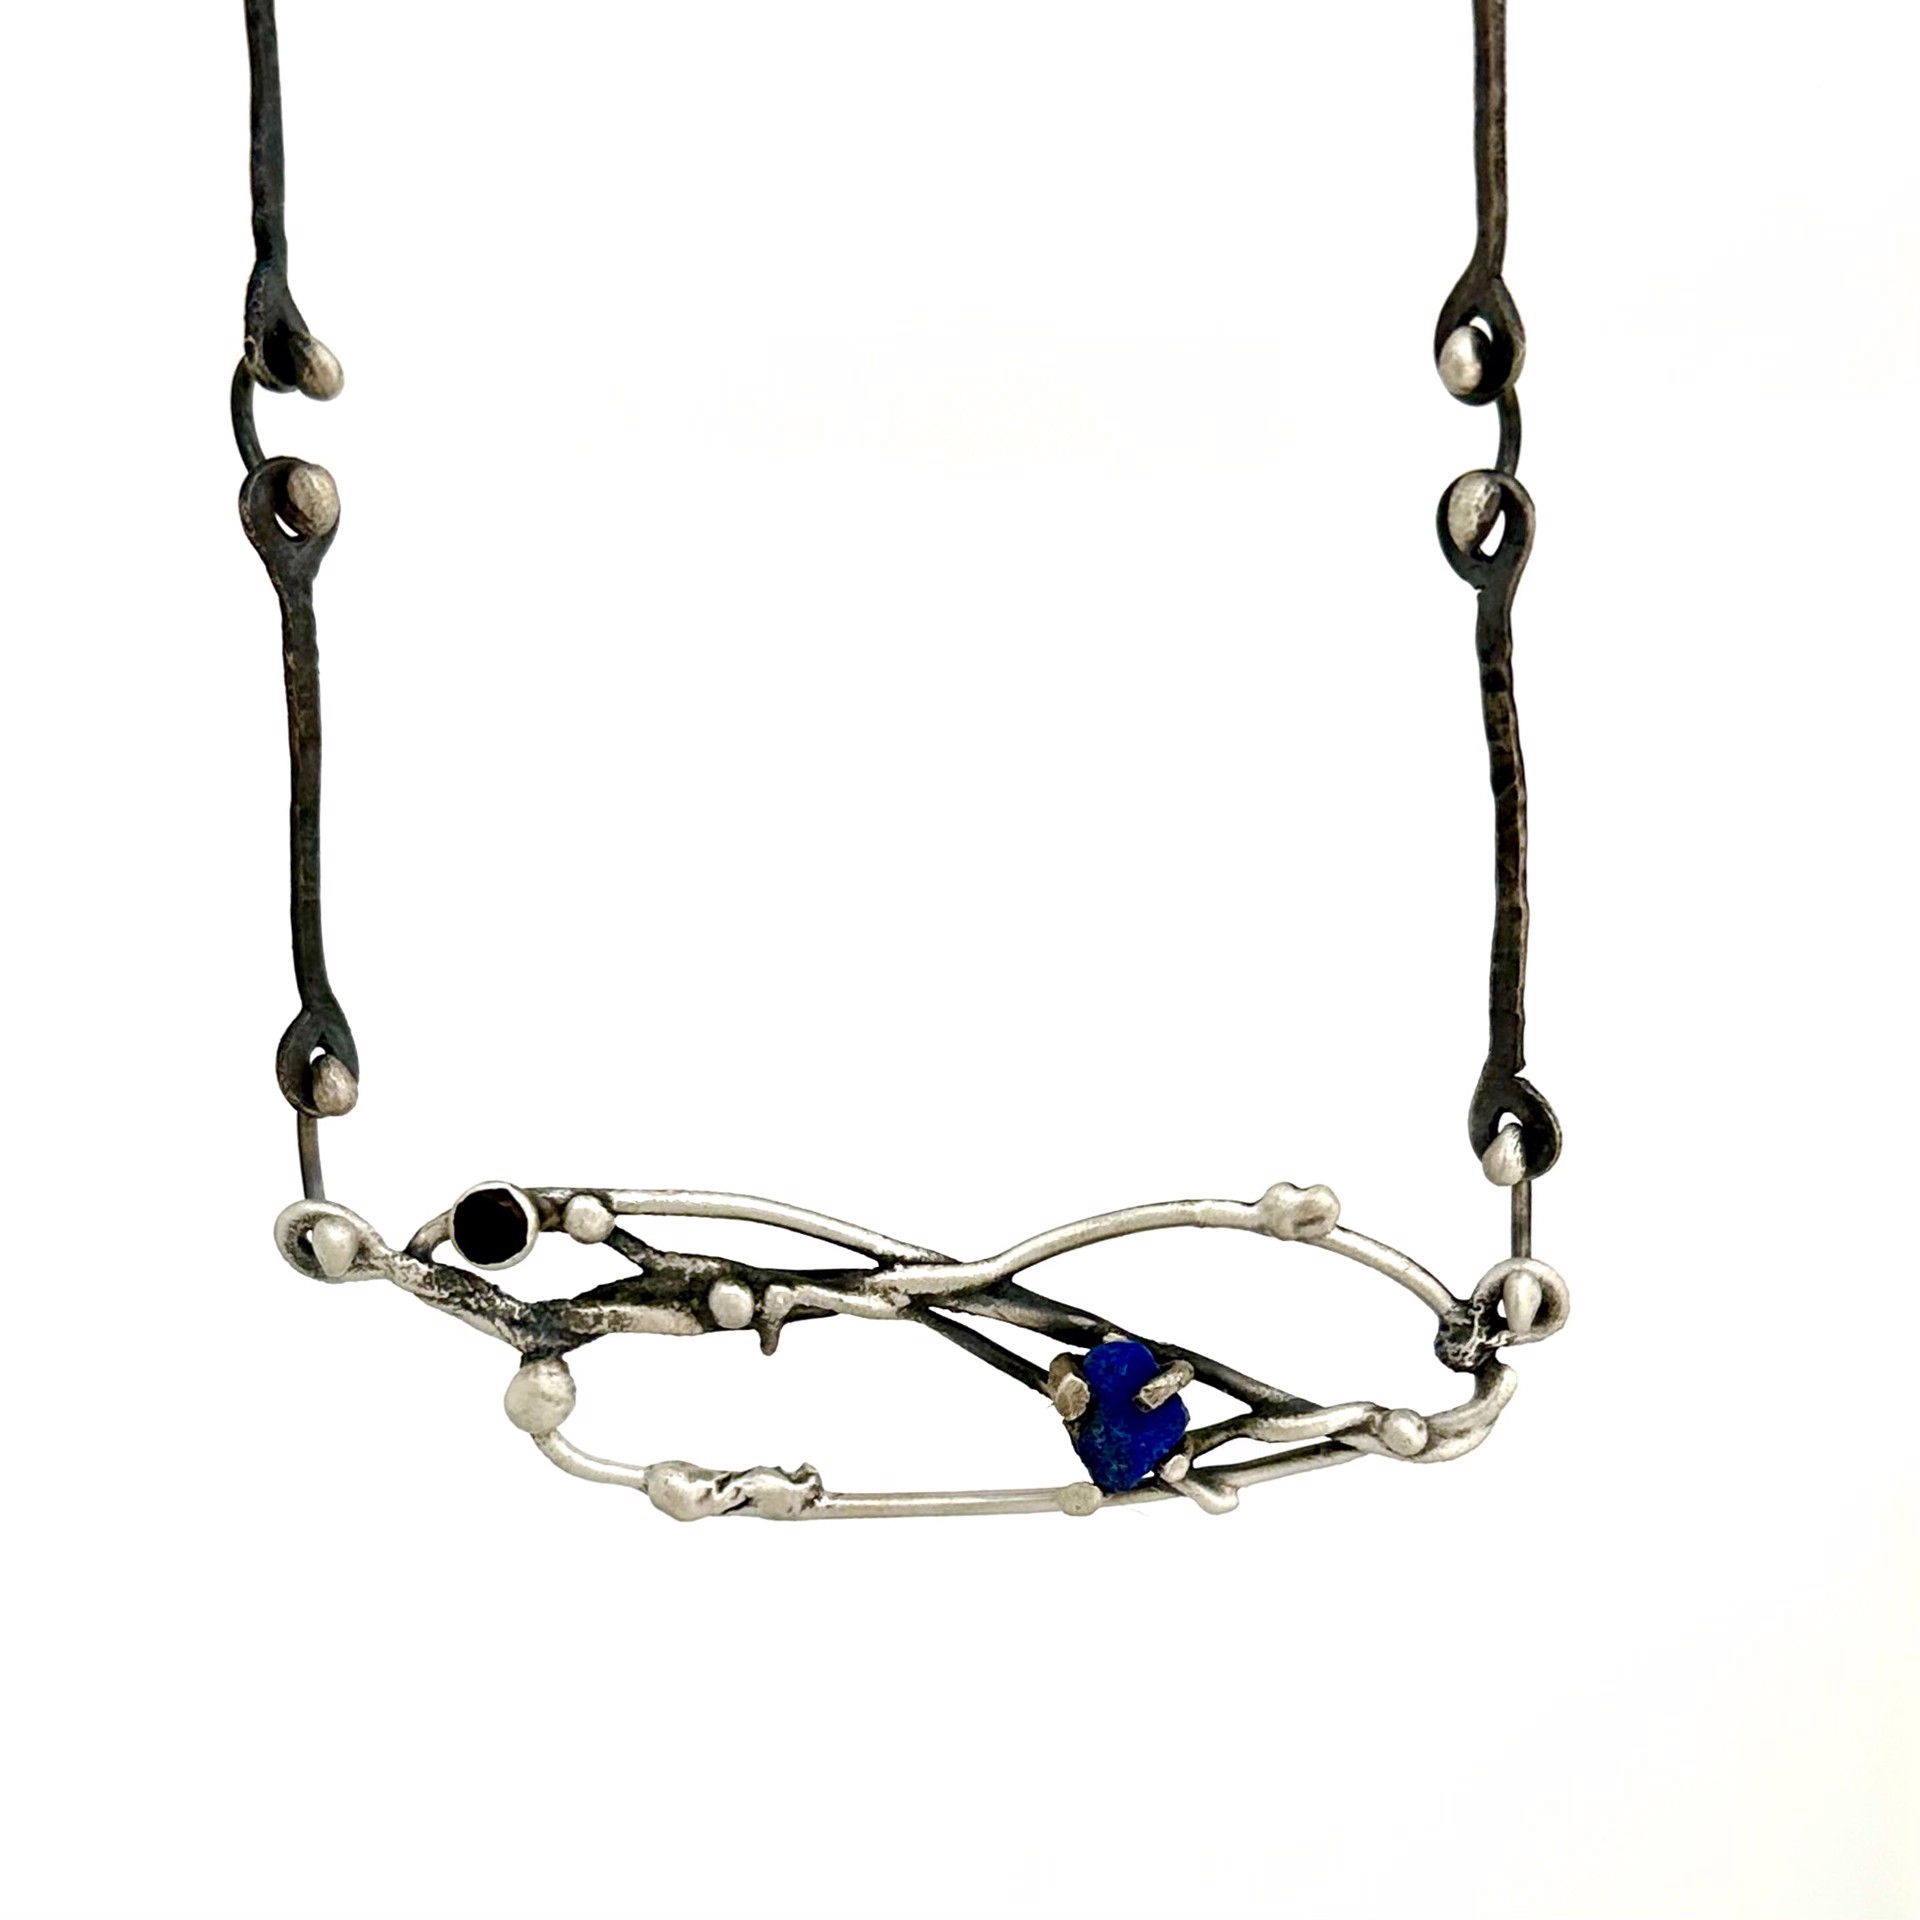 Ruby and Lapis Nest Necklace by Lori Swartz